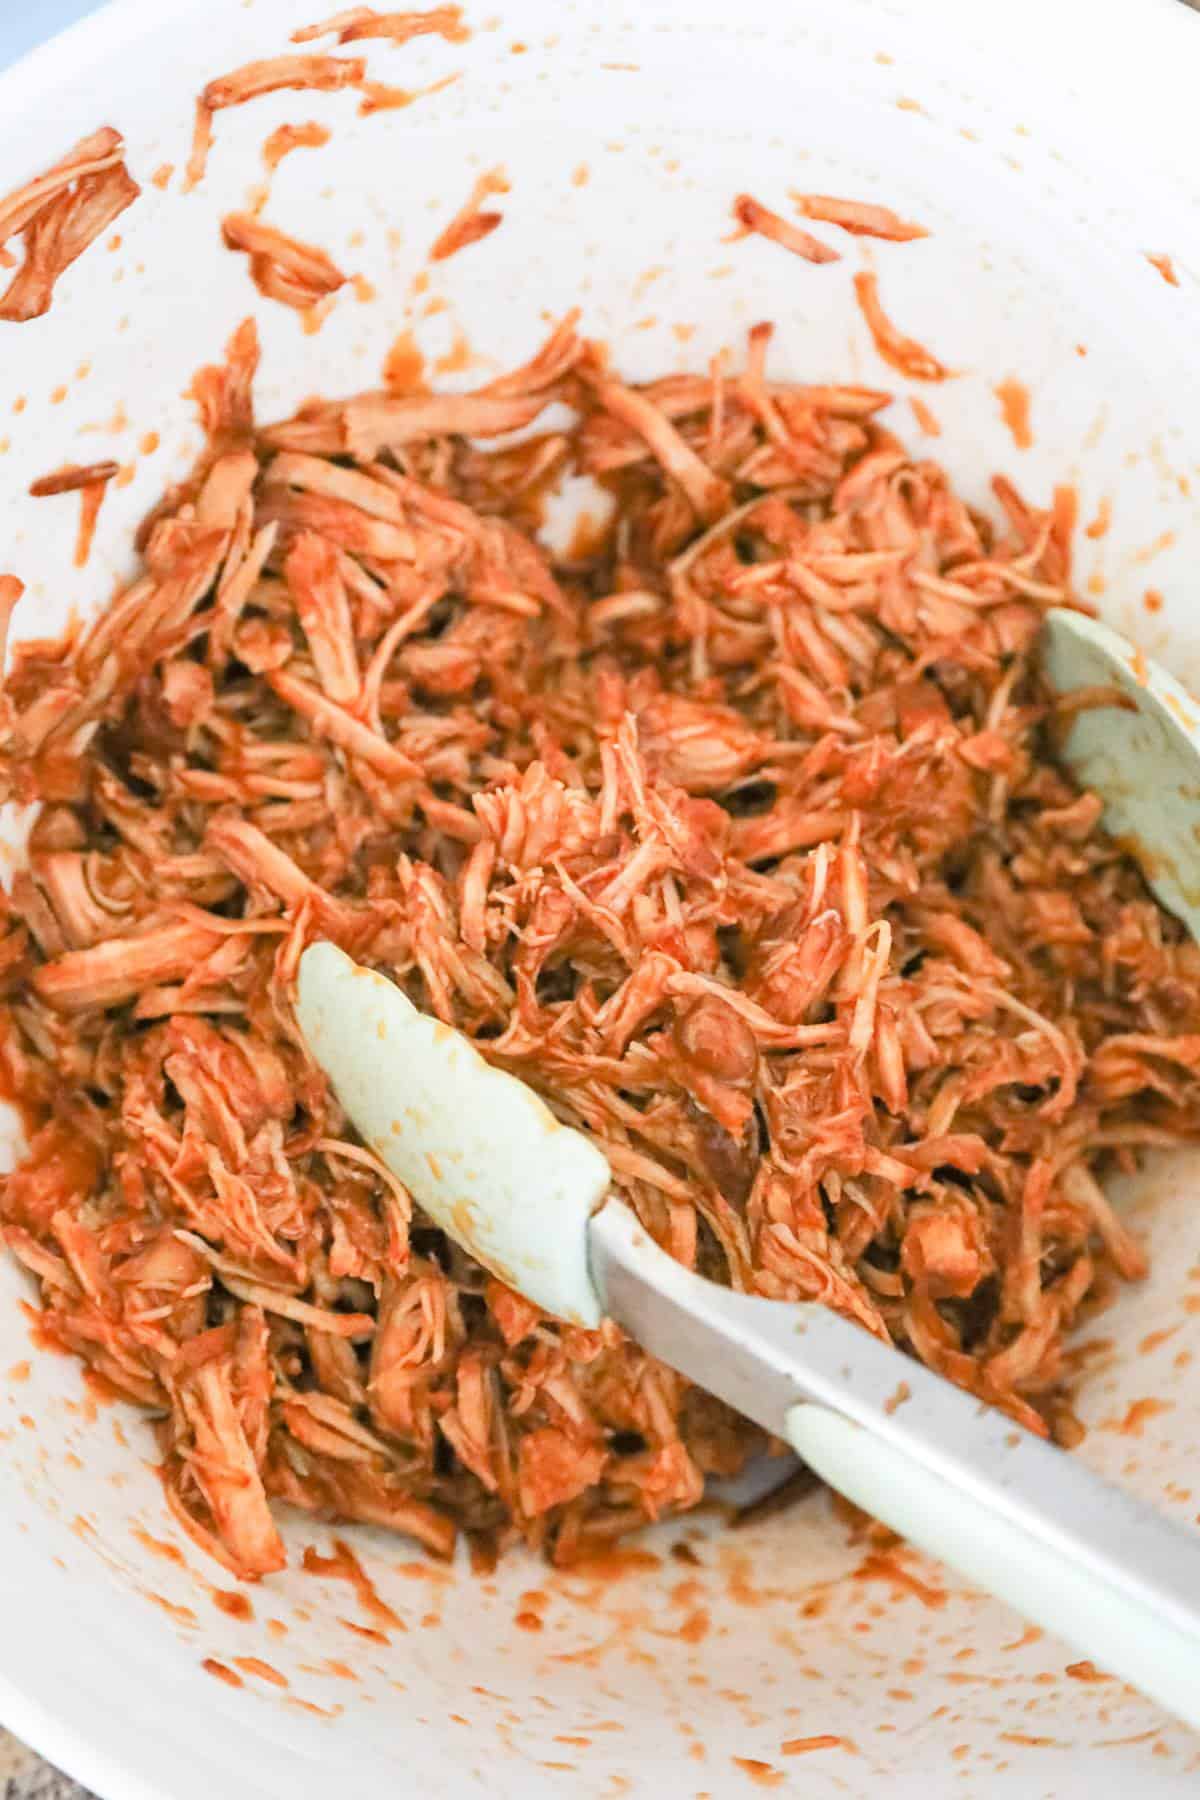 pulled pork tossed in bbq sauce in a mixing bowl